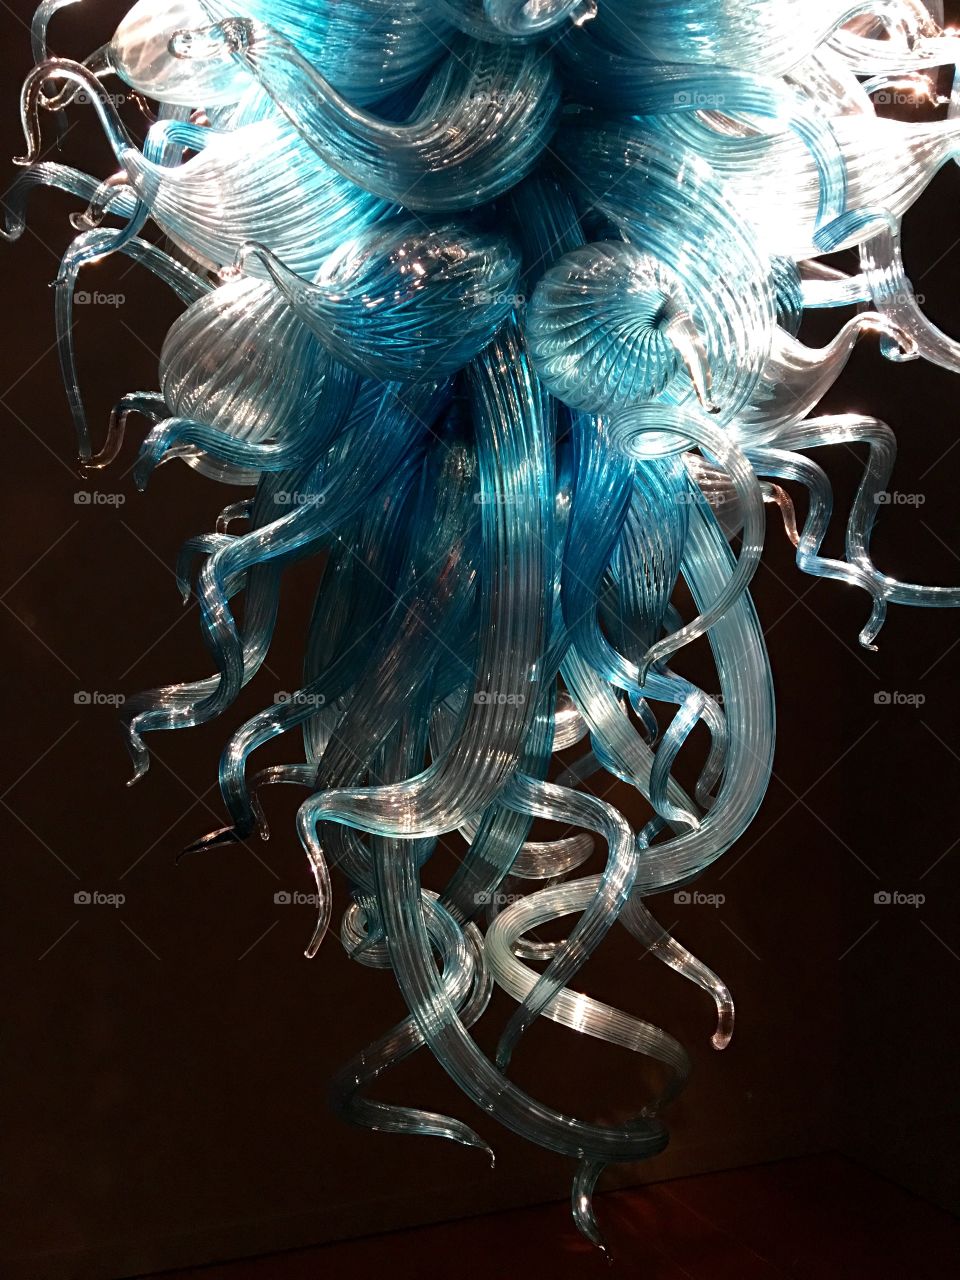 Chihuly Garden & Glass in Seattle, WA